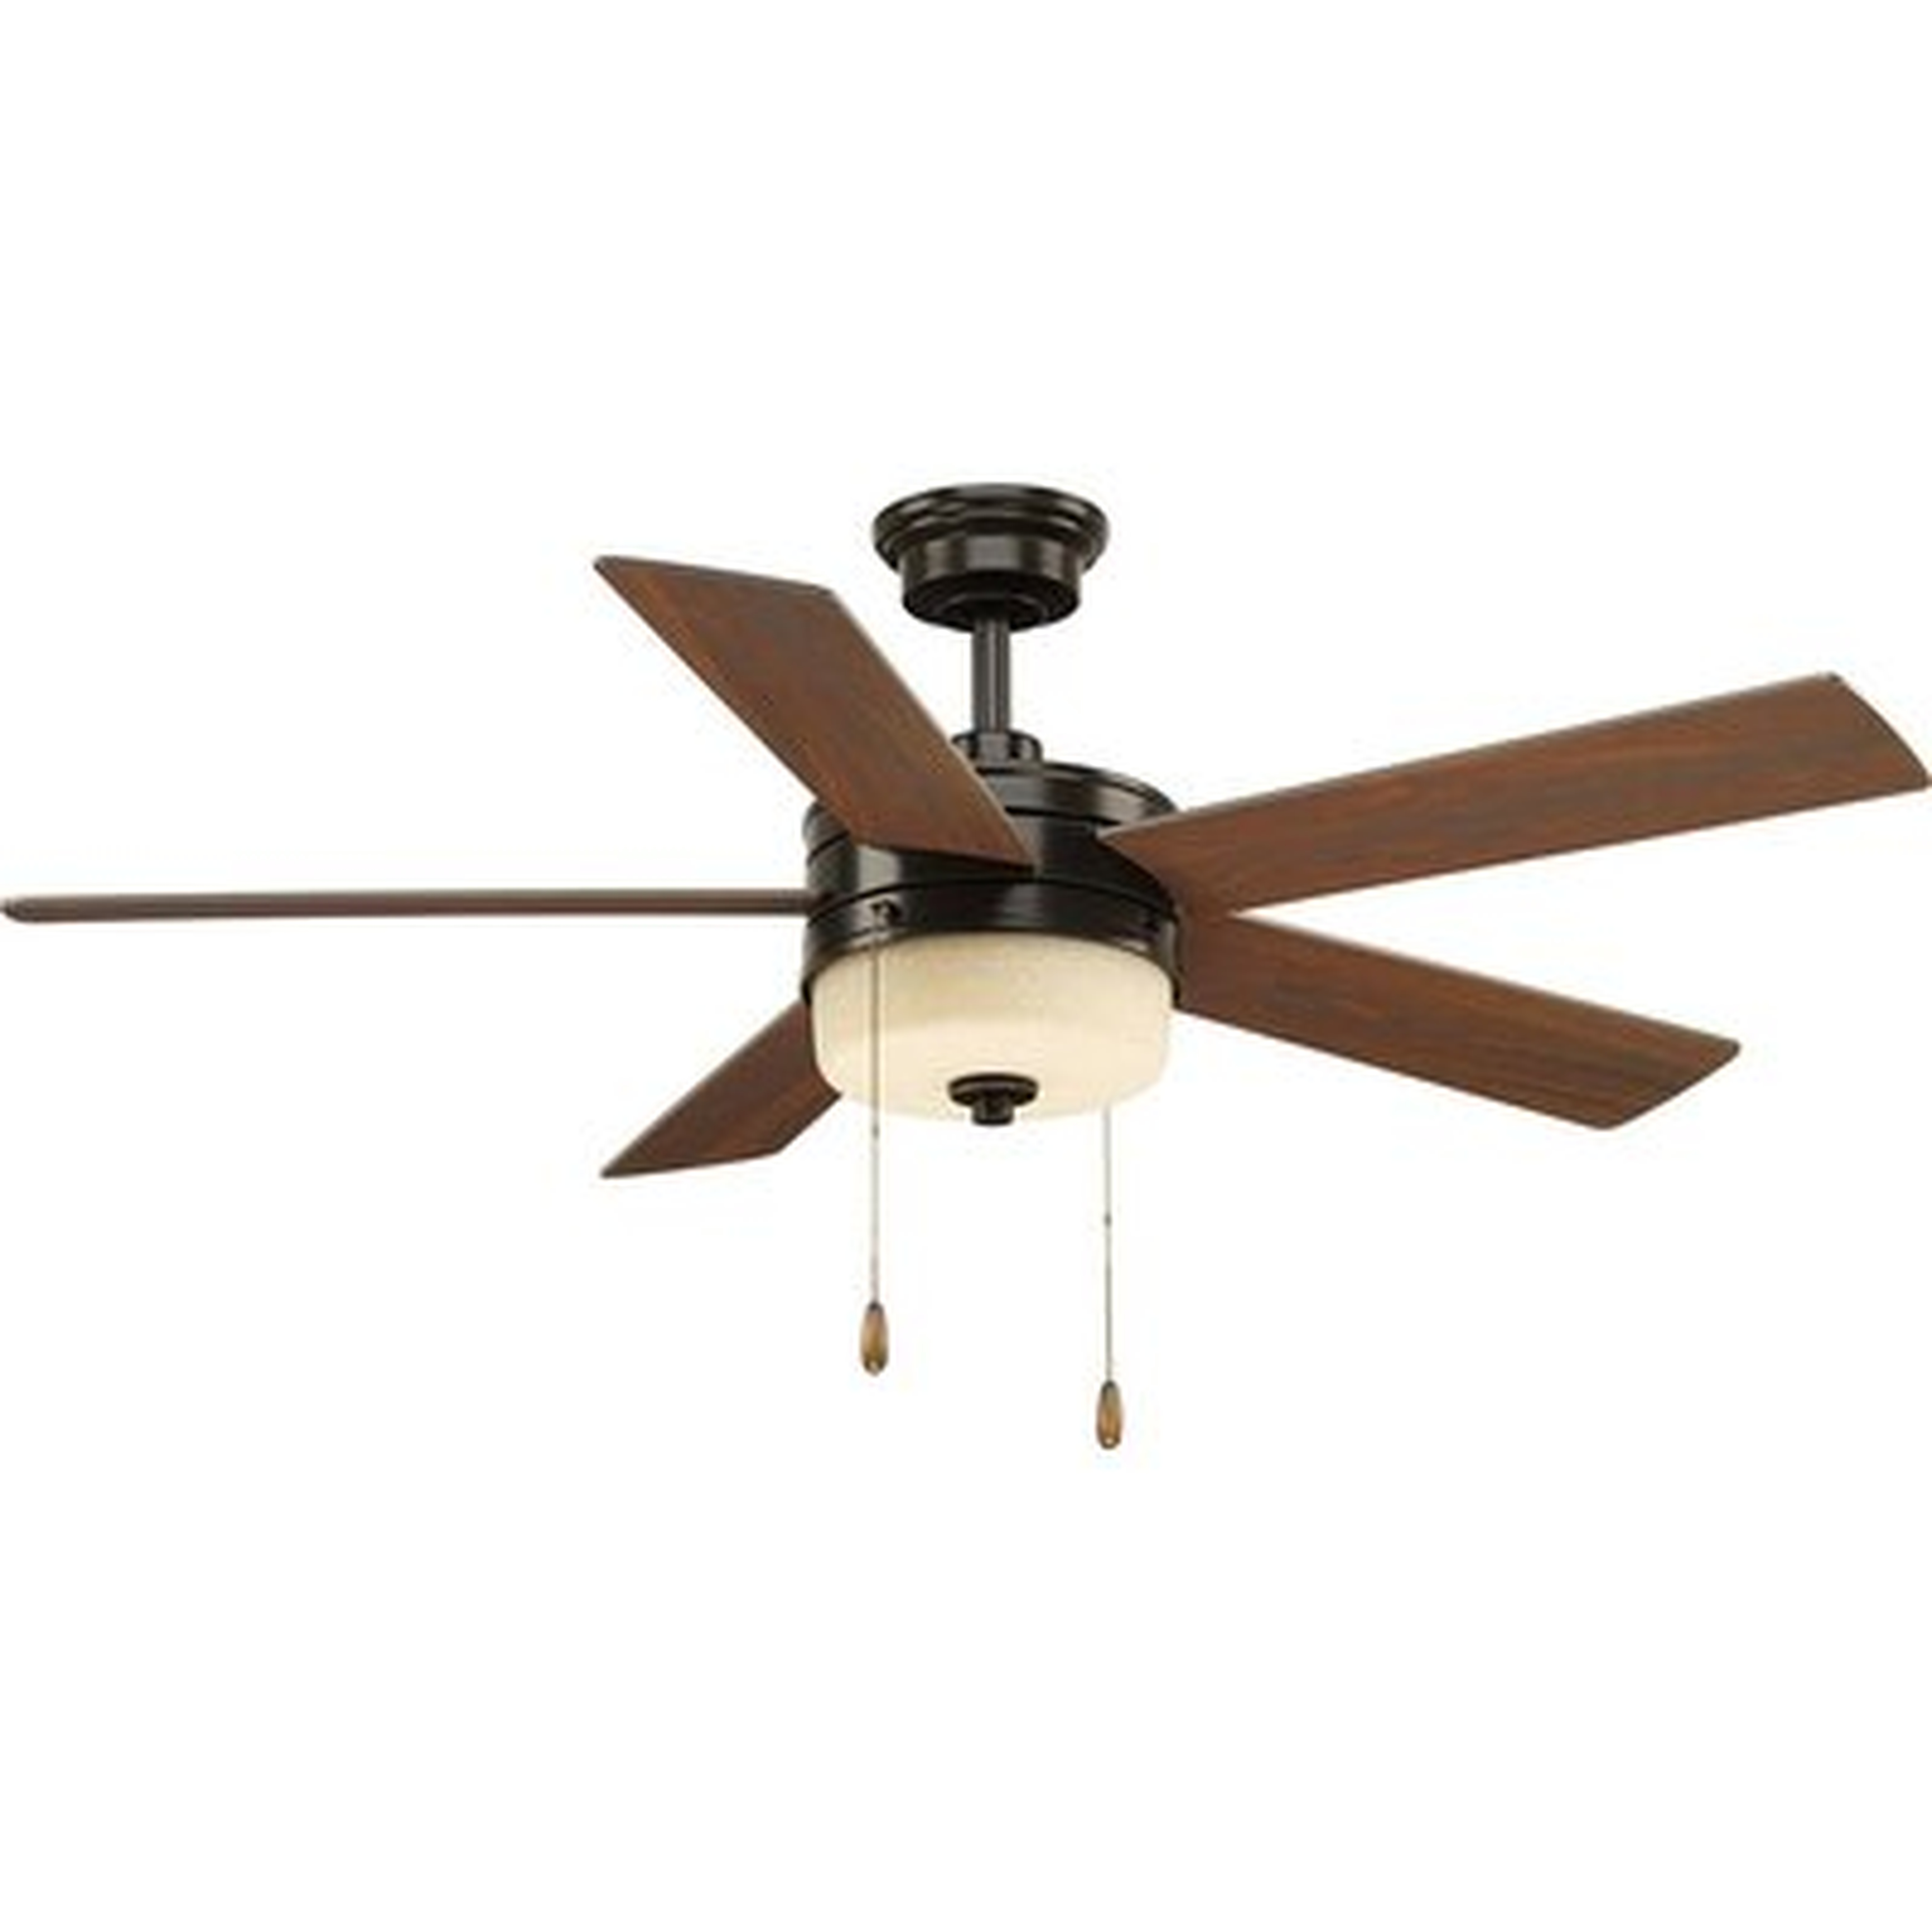 52" Van Nest 5 - Blade LED Standard Ceiling Fan with Pull Chain and Light Kit Included - Birch Lane